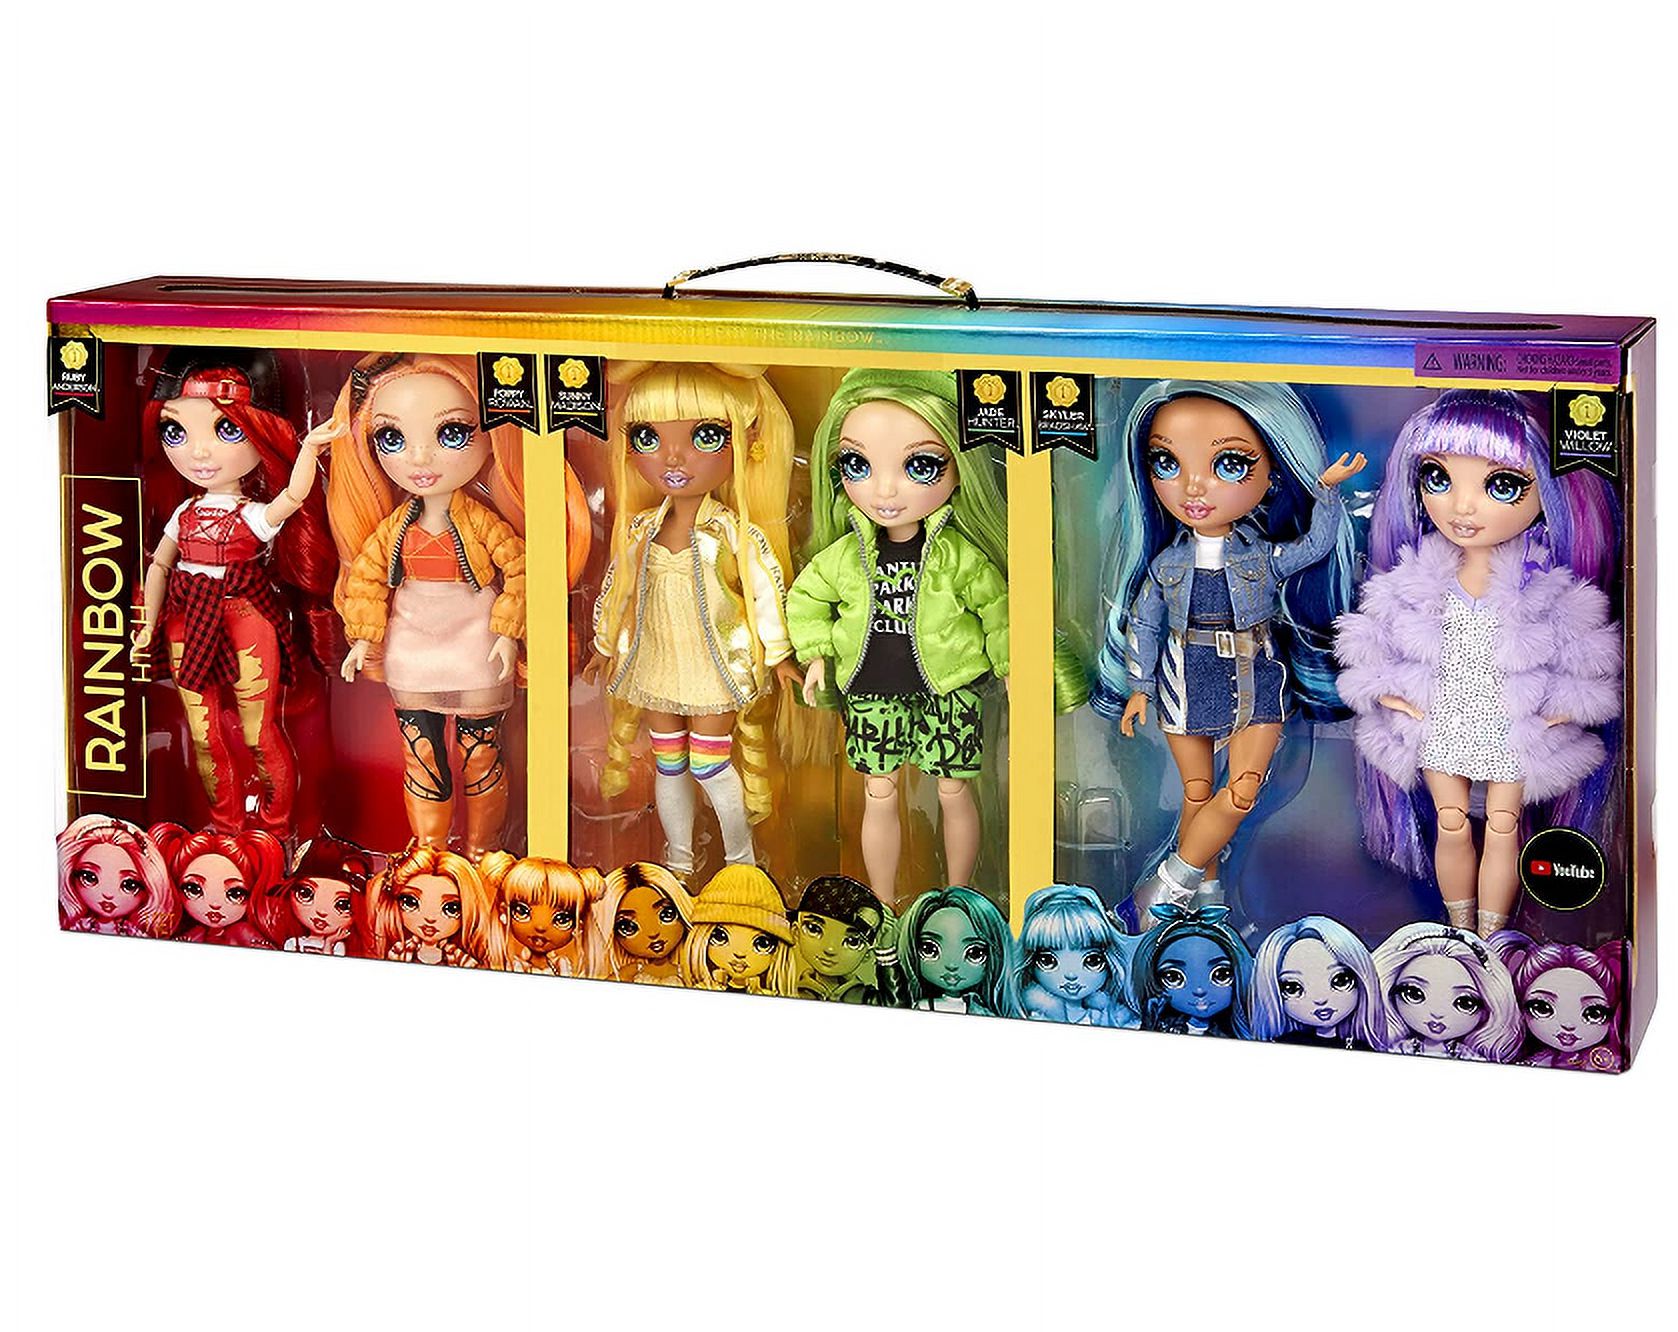 Rainbow High Original Fashion Doll 6-Pack , Violet, Ruby, Sunny, Skyler, Poppy and Jade, 11-inch Poseable Fashion Doll, Includes 6 Outfits, 6 Pairs of Shoes and accessories. Great Gift and Toy for Kid - image 3 of 5